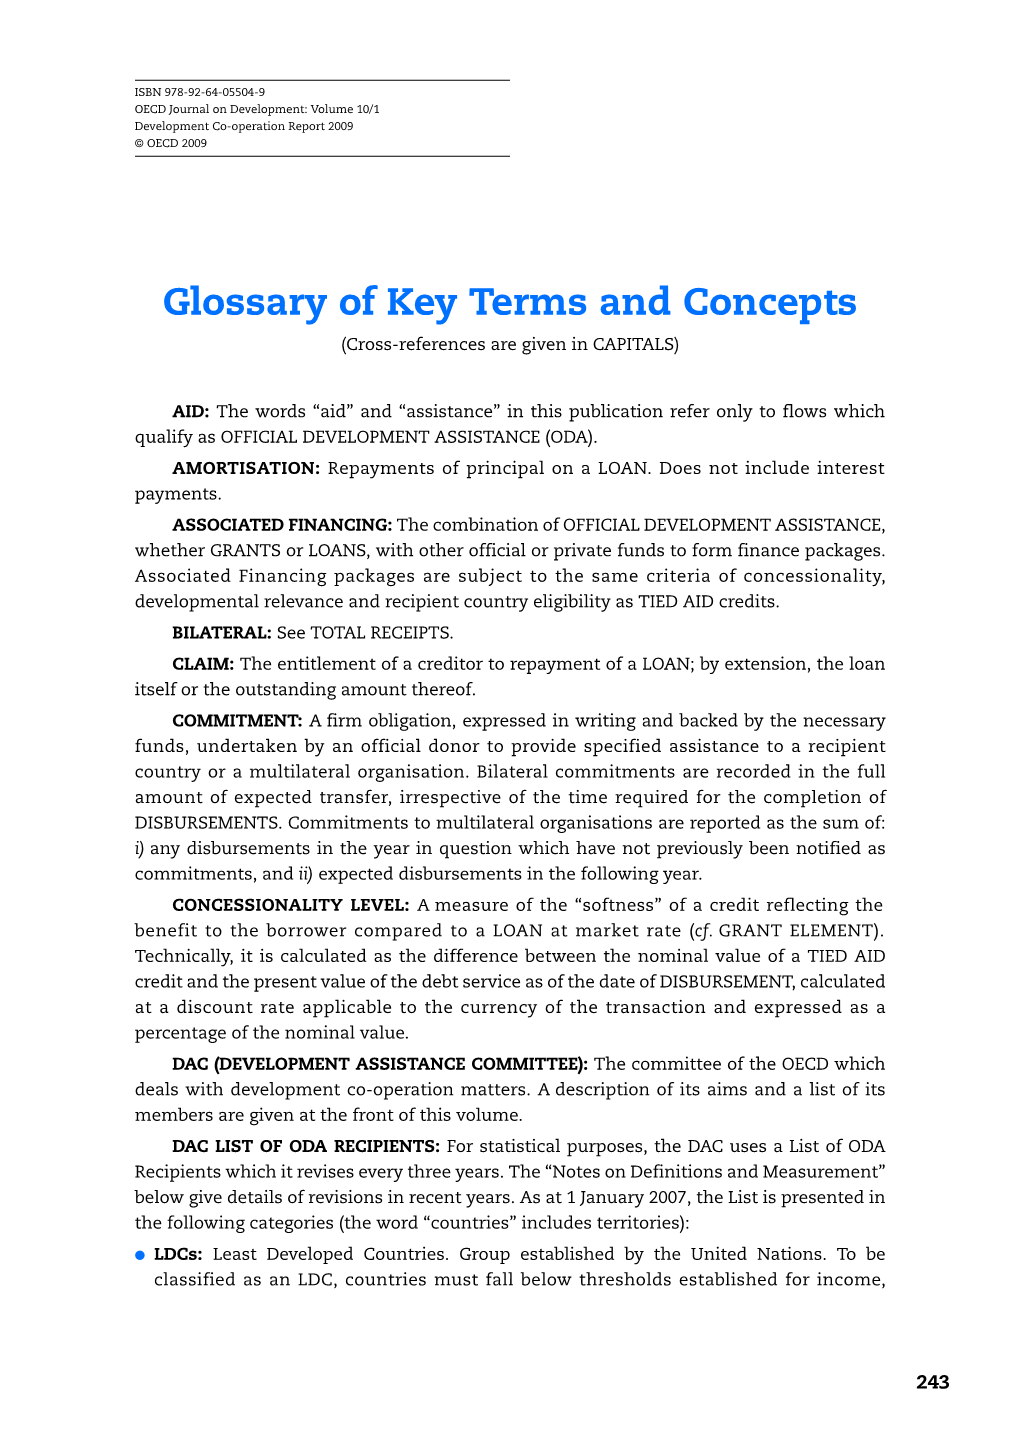 Glossary of Key Terms and Concepts (Cross-References Are Given in CAPITALS)